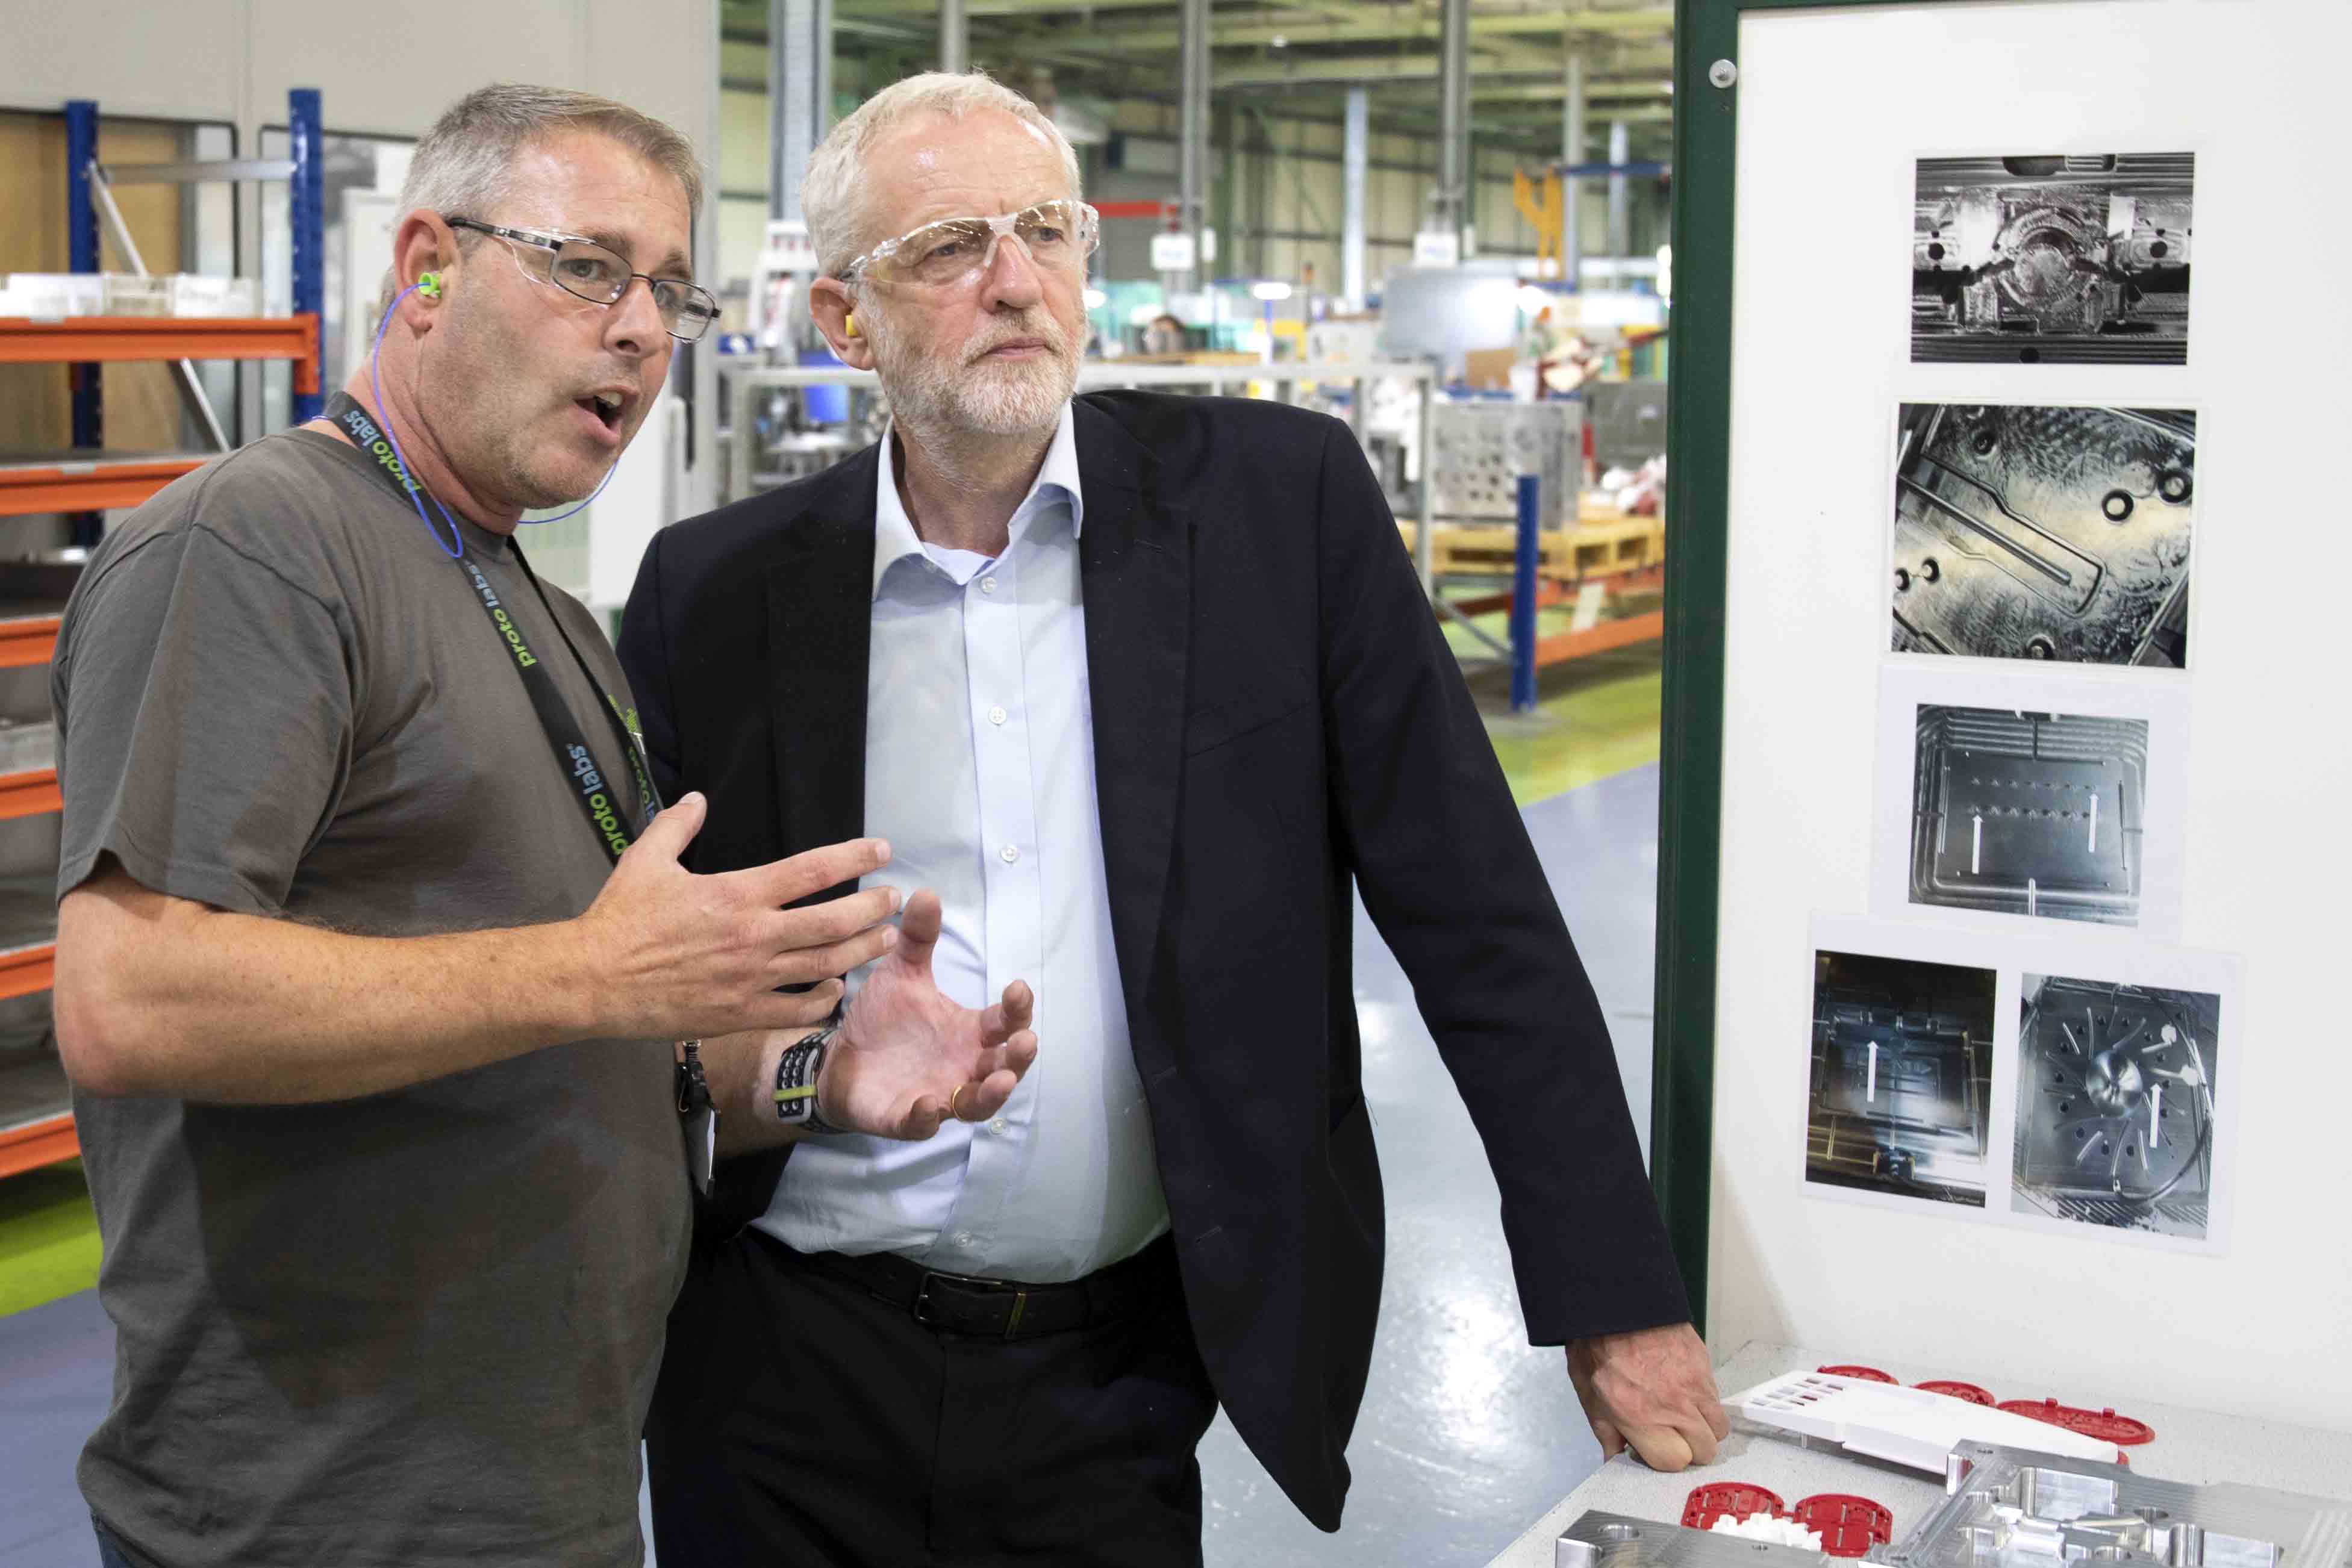 Jeremy Corbyn tours the Protolabs manufacturing facility in Telford. Photo via Protolabs.